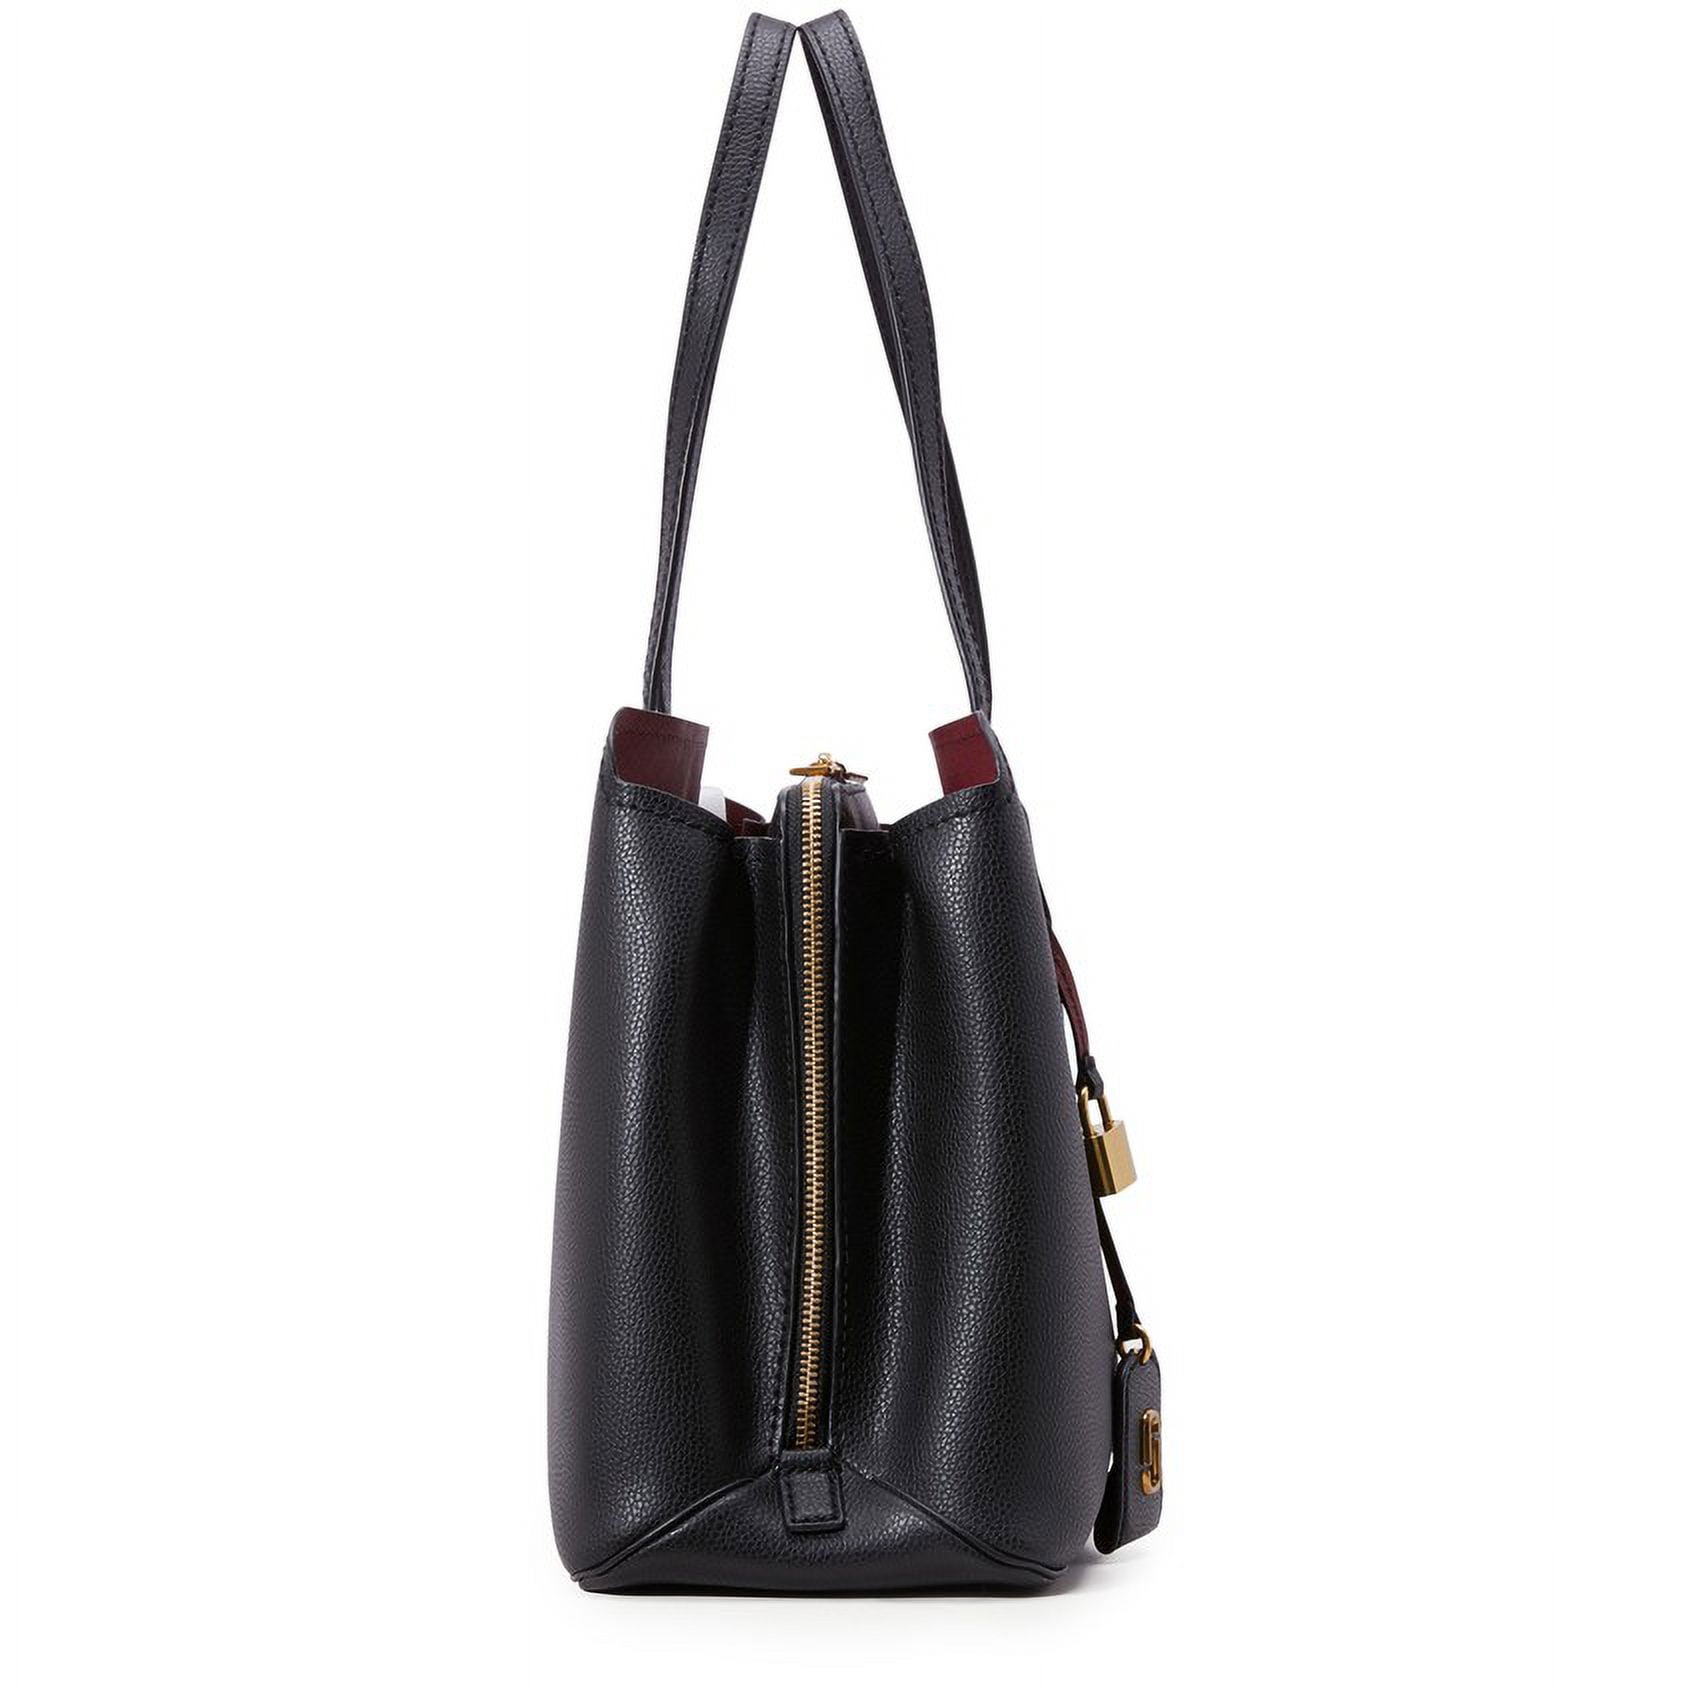 MARC JACOBS: The Editor bag in grained leather - Black